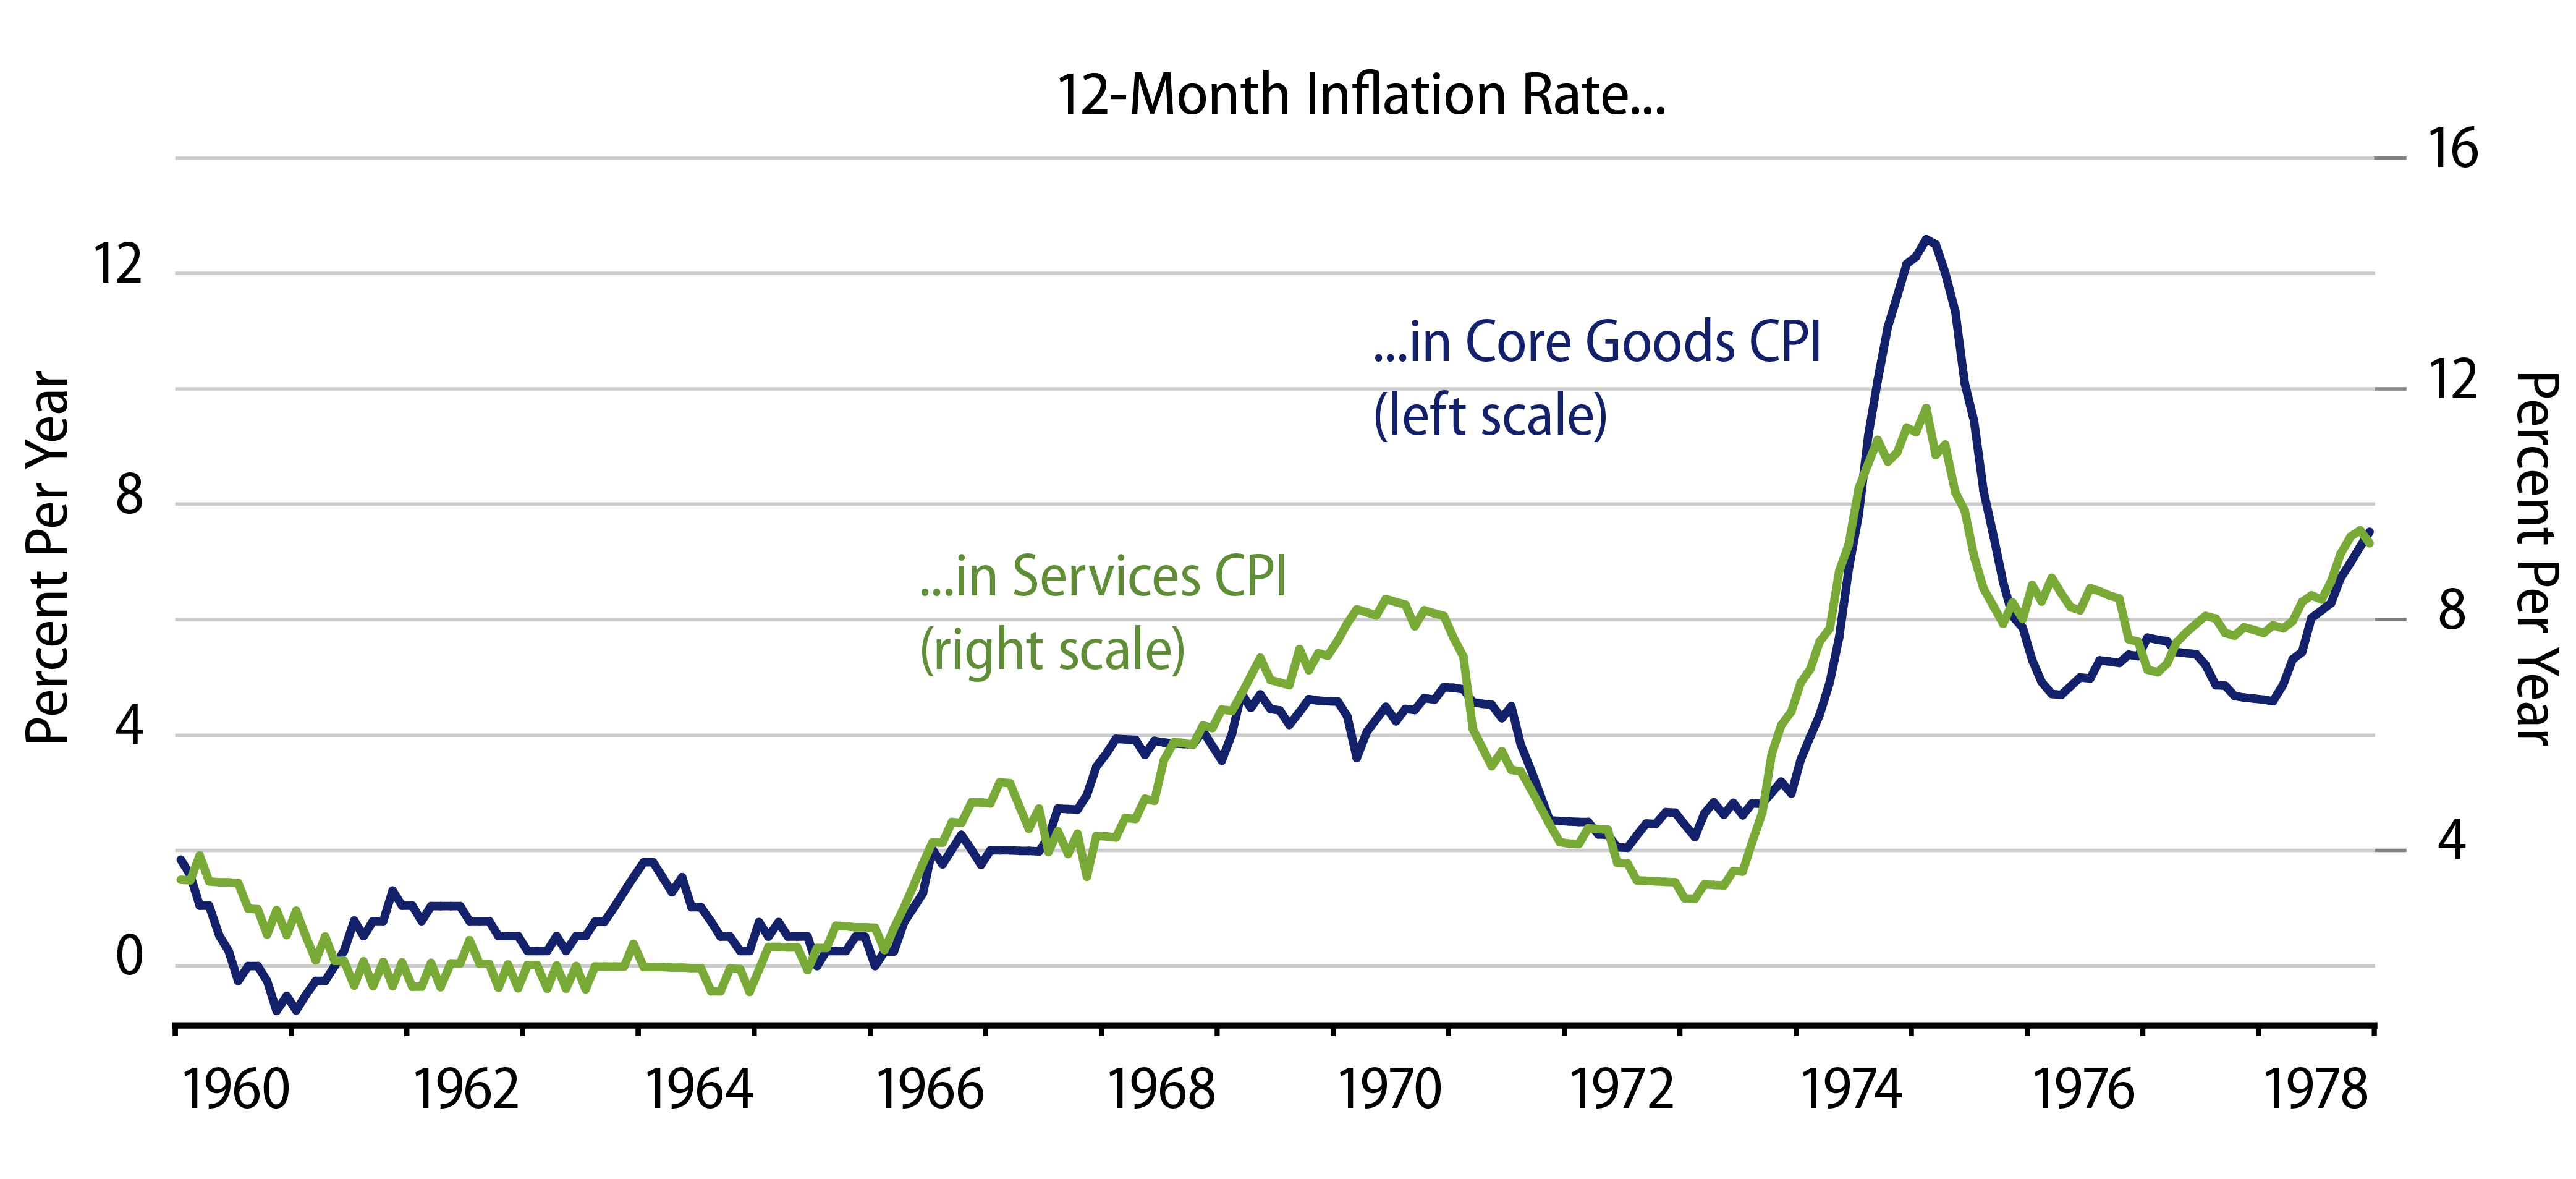 Goods Prices vs. Services Prices During 1960s/1970s Inflation